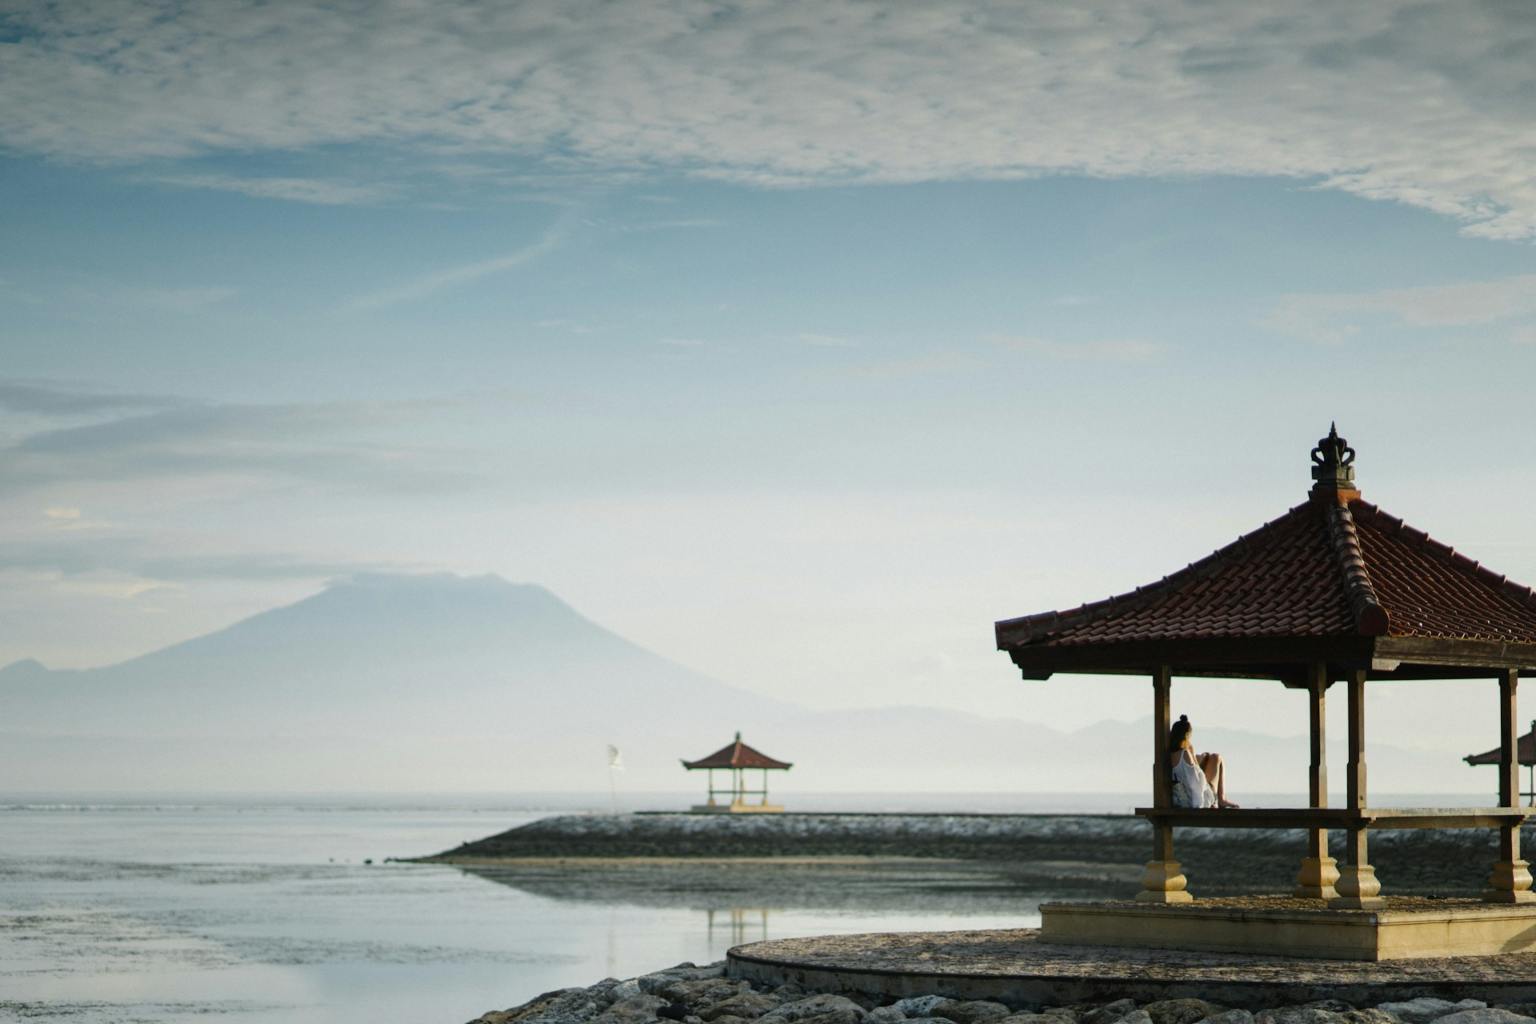 two huts near the ocean in Bali Indonesia